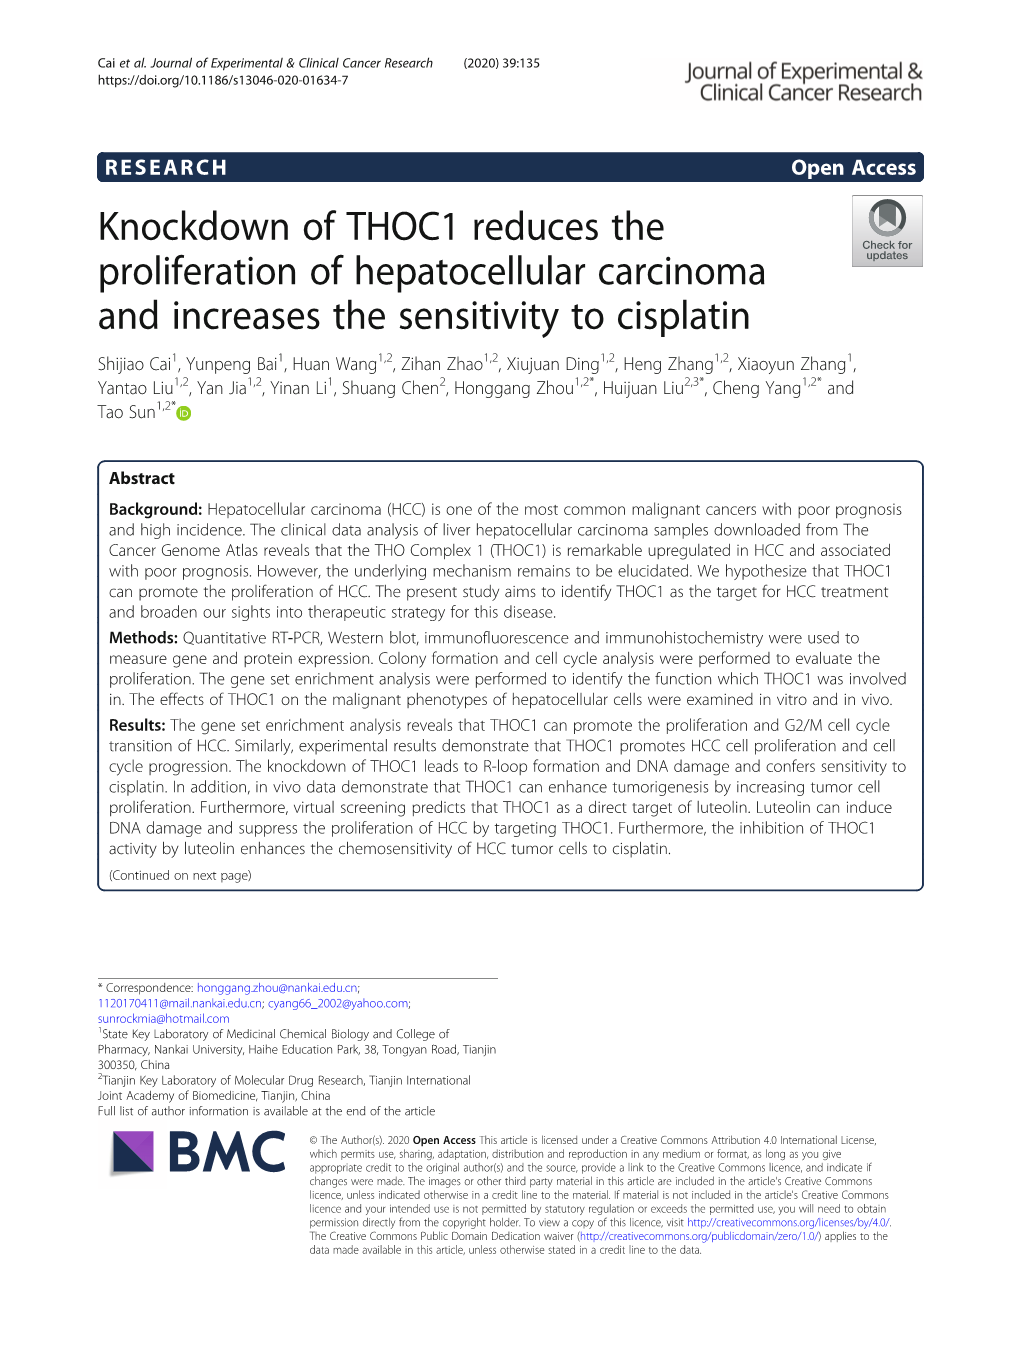 Knockdown of THOC1 Reduces the Proliferation of Hepatocellular